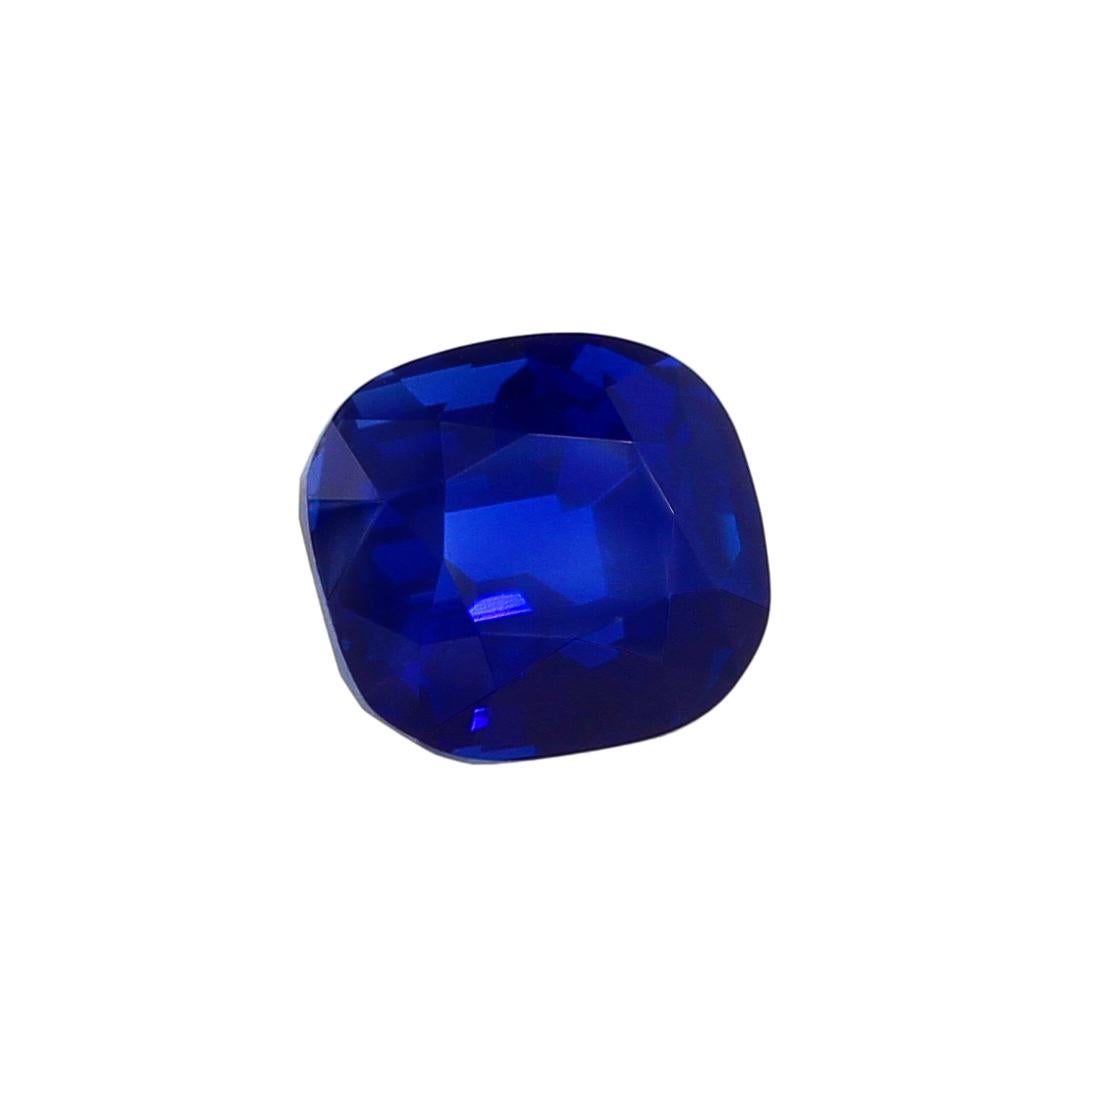 A three-carat, natural, no-heat (untreated), cushion shape sapphire from the original mines in Kashmir, India. The color of this stone is the epitome of the “cornflower blue” hue sought by collectors and sapphire aficionados around the world. The